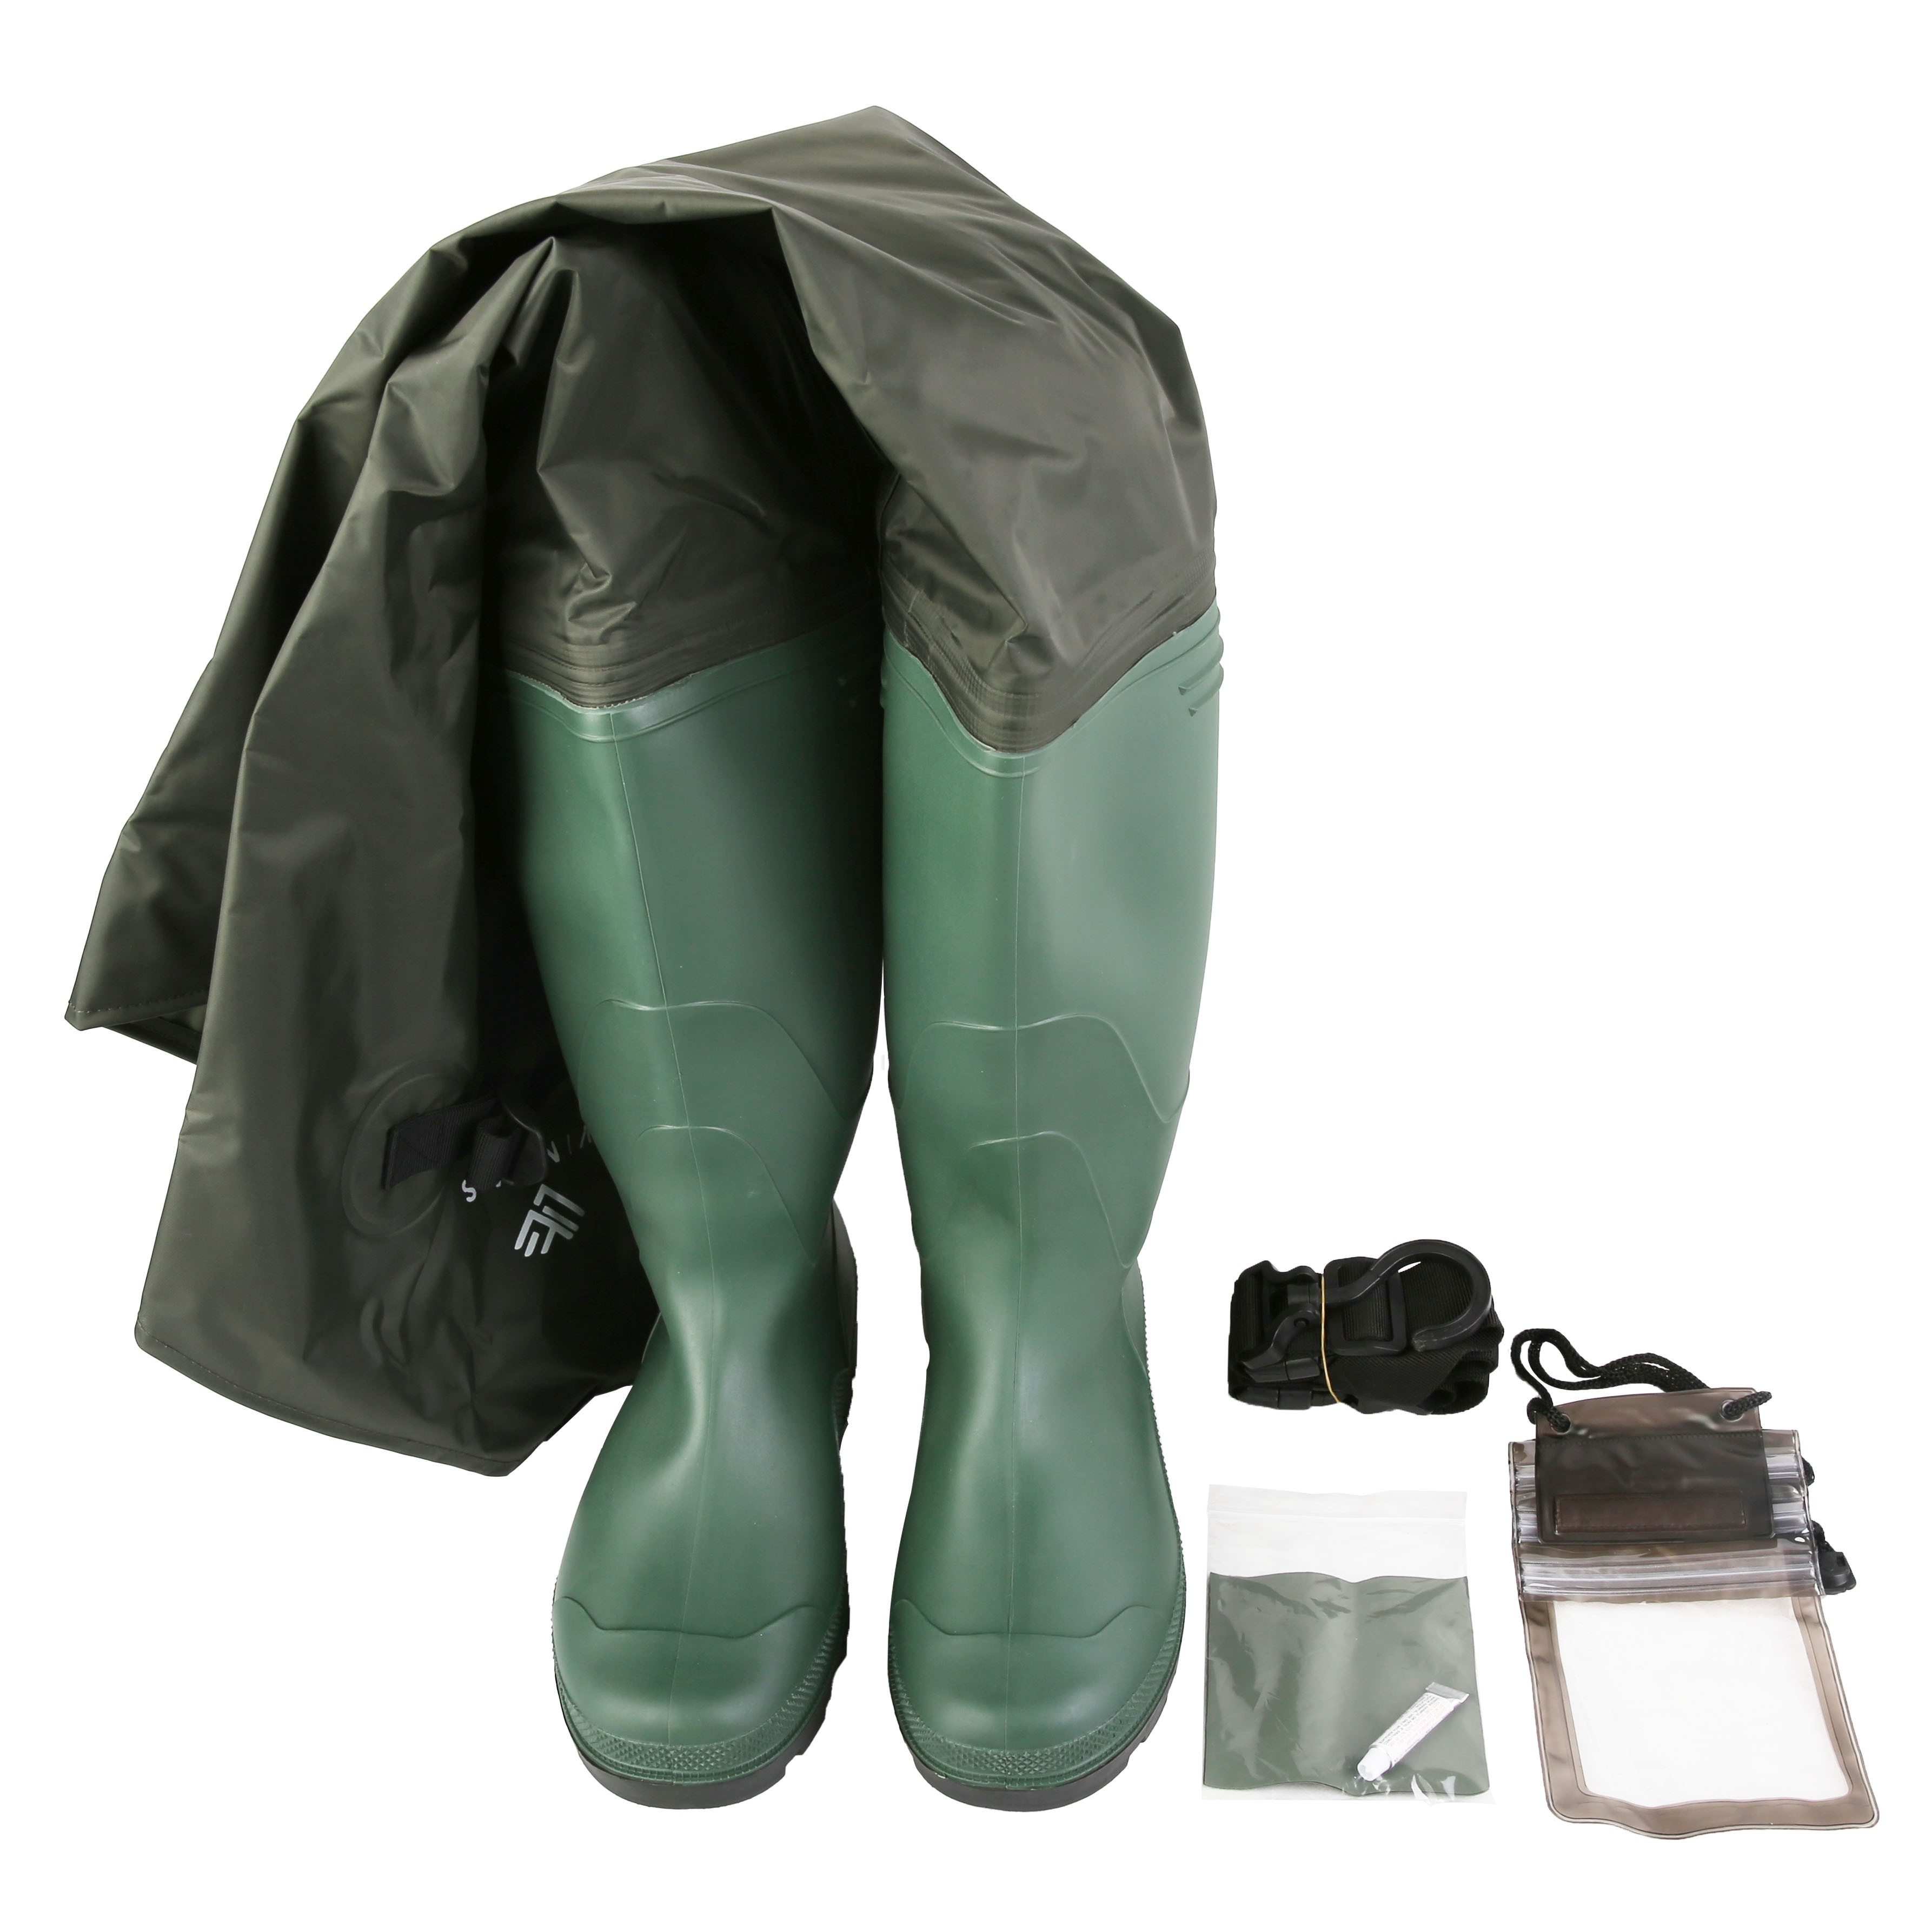 Waders and jeans  Fishing boots, Wellies rain boots, Wellies boots